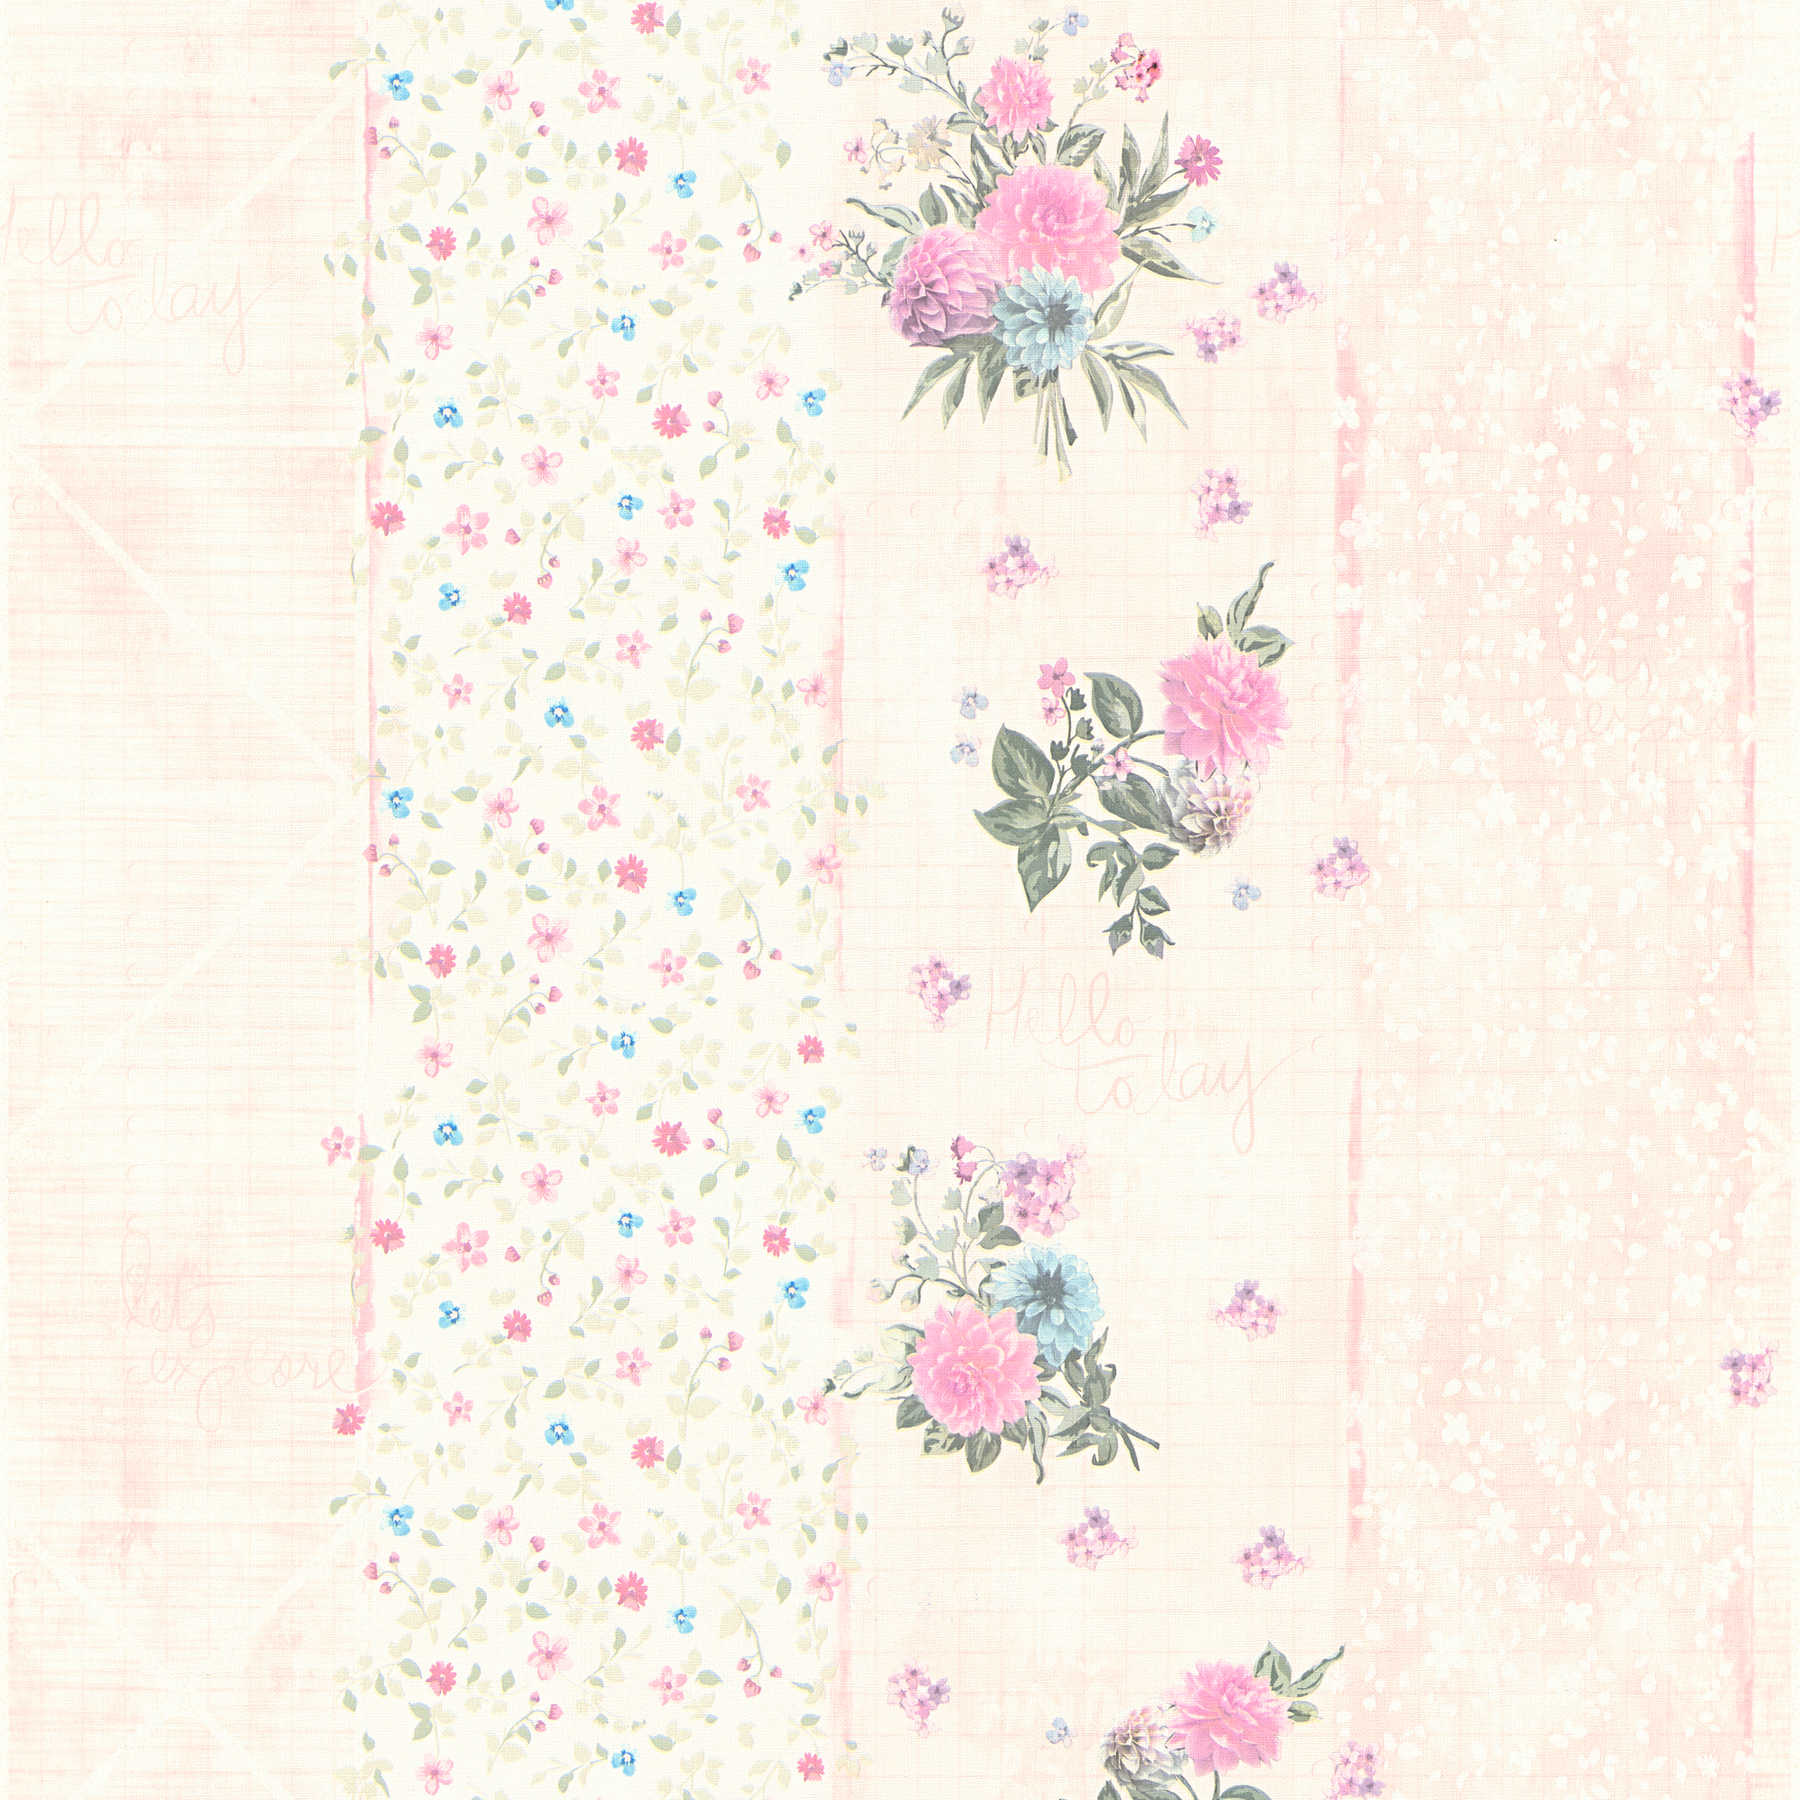 Flowers wallpaper with striped design - colourful, pink
